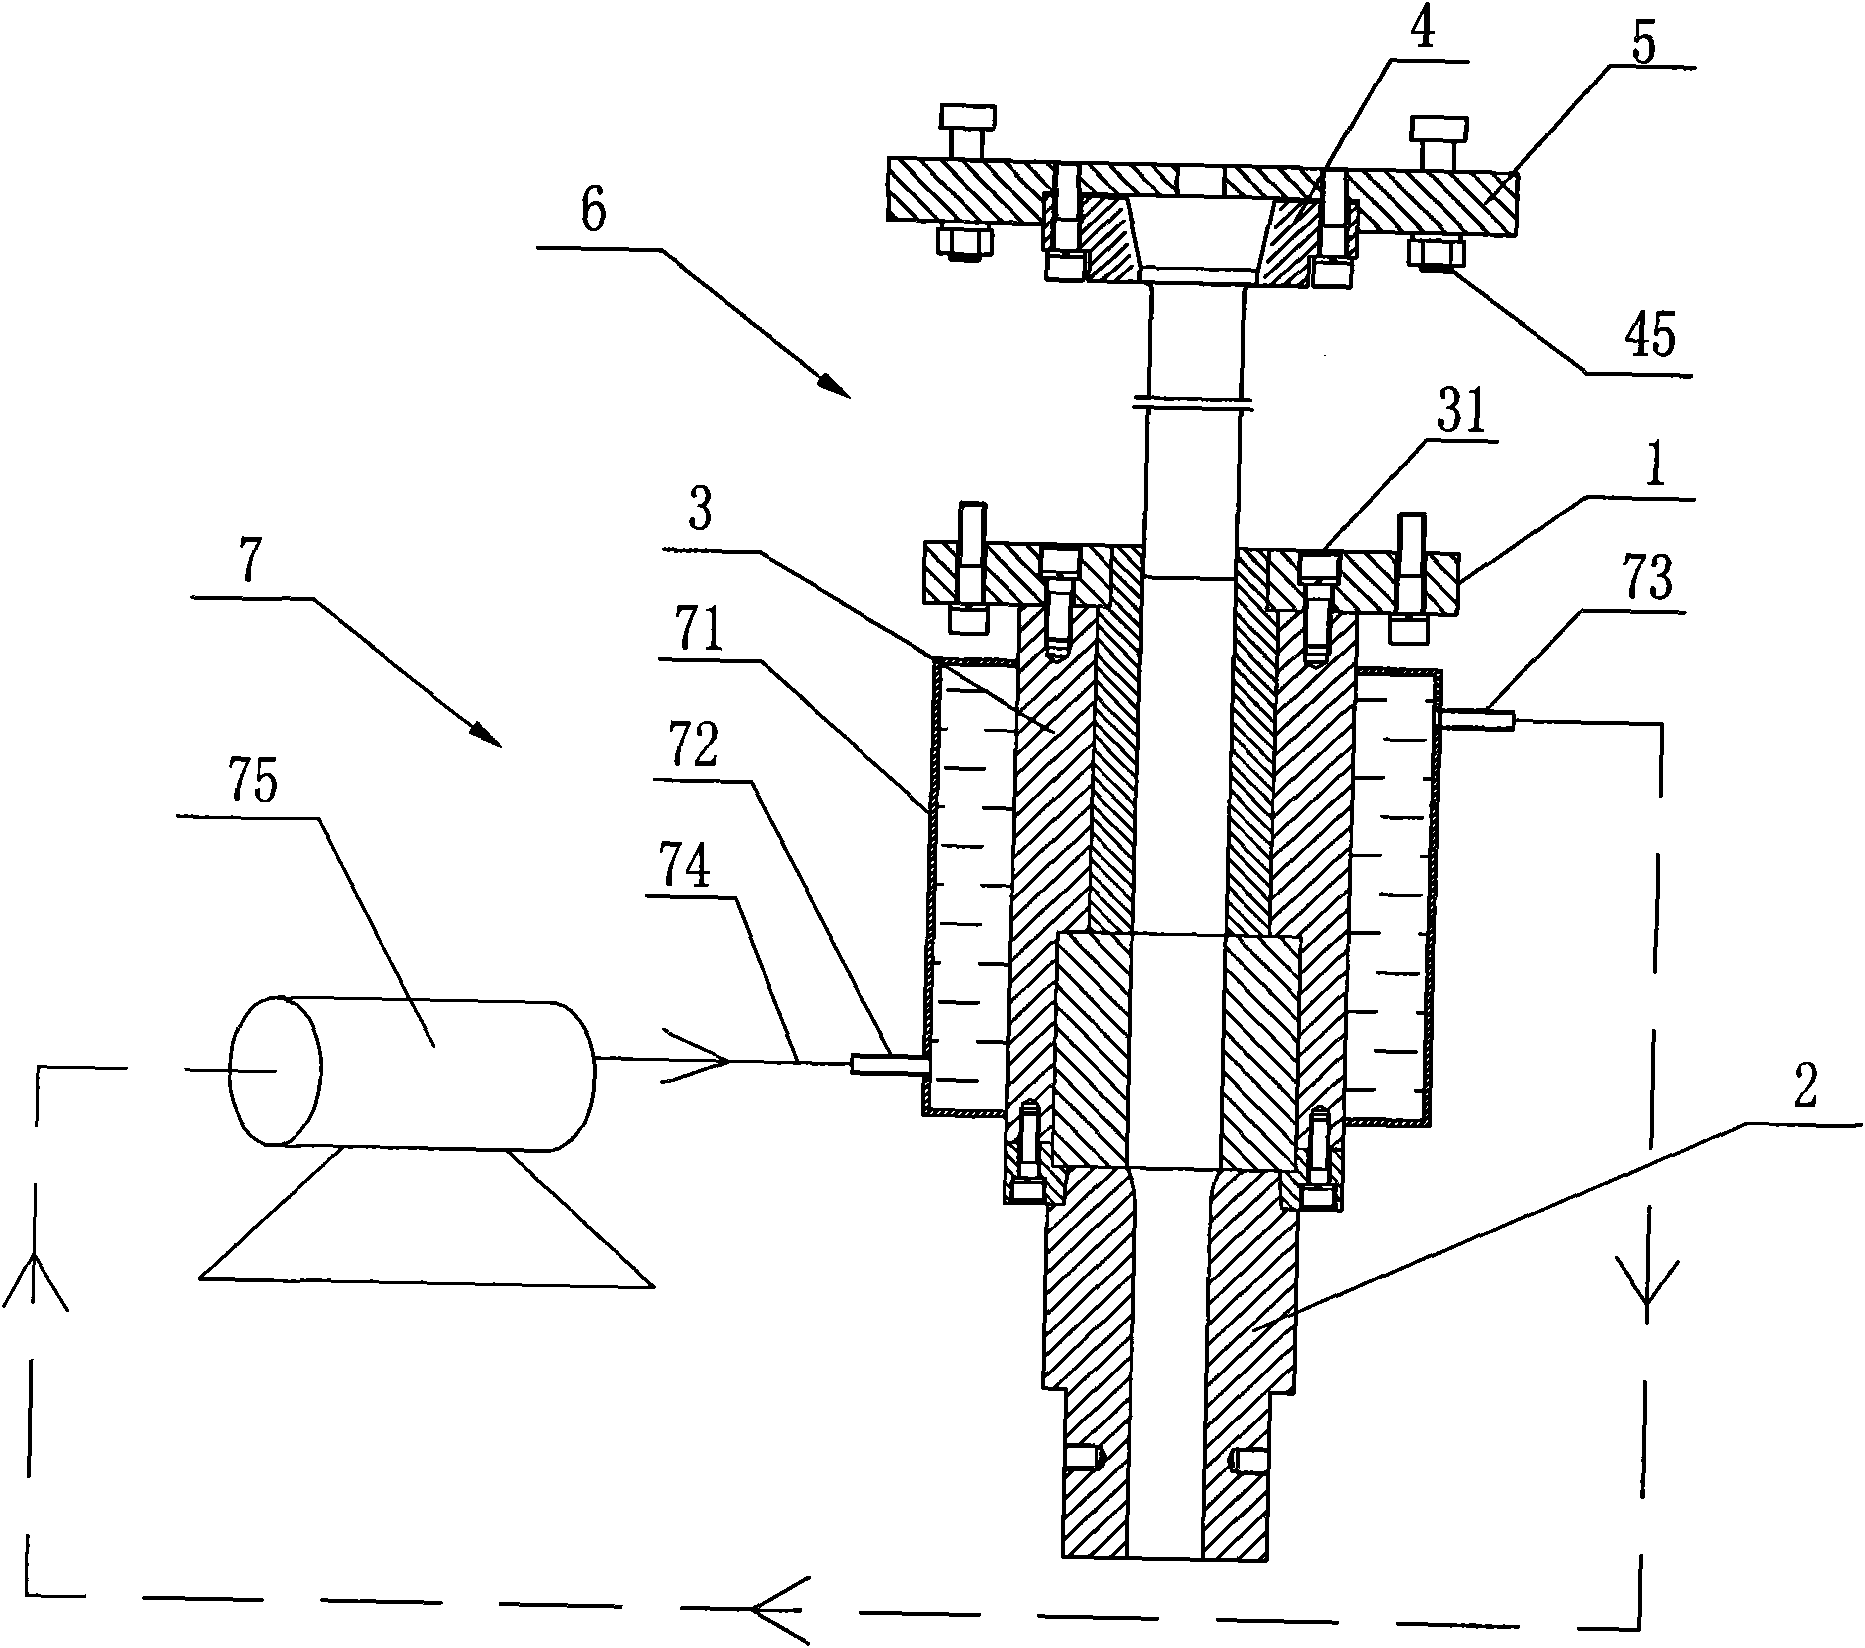 Half-shaft pre-upsetting cooling system